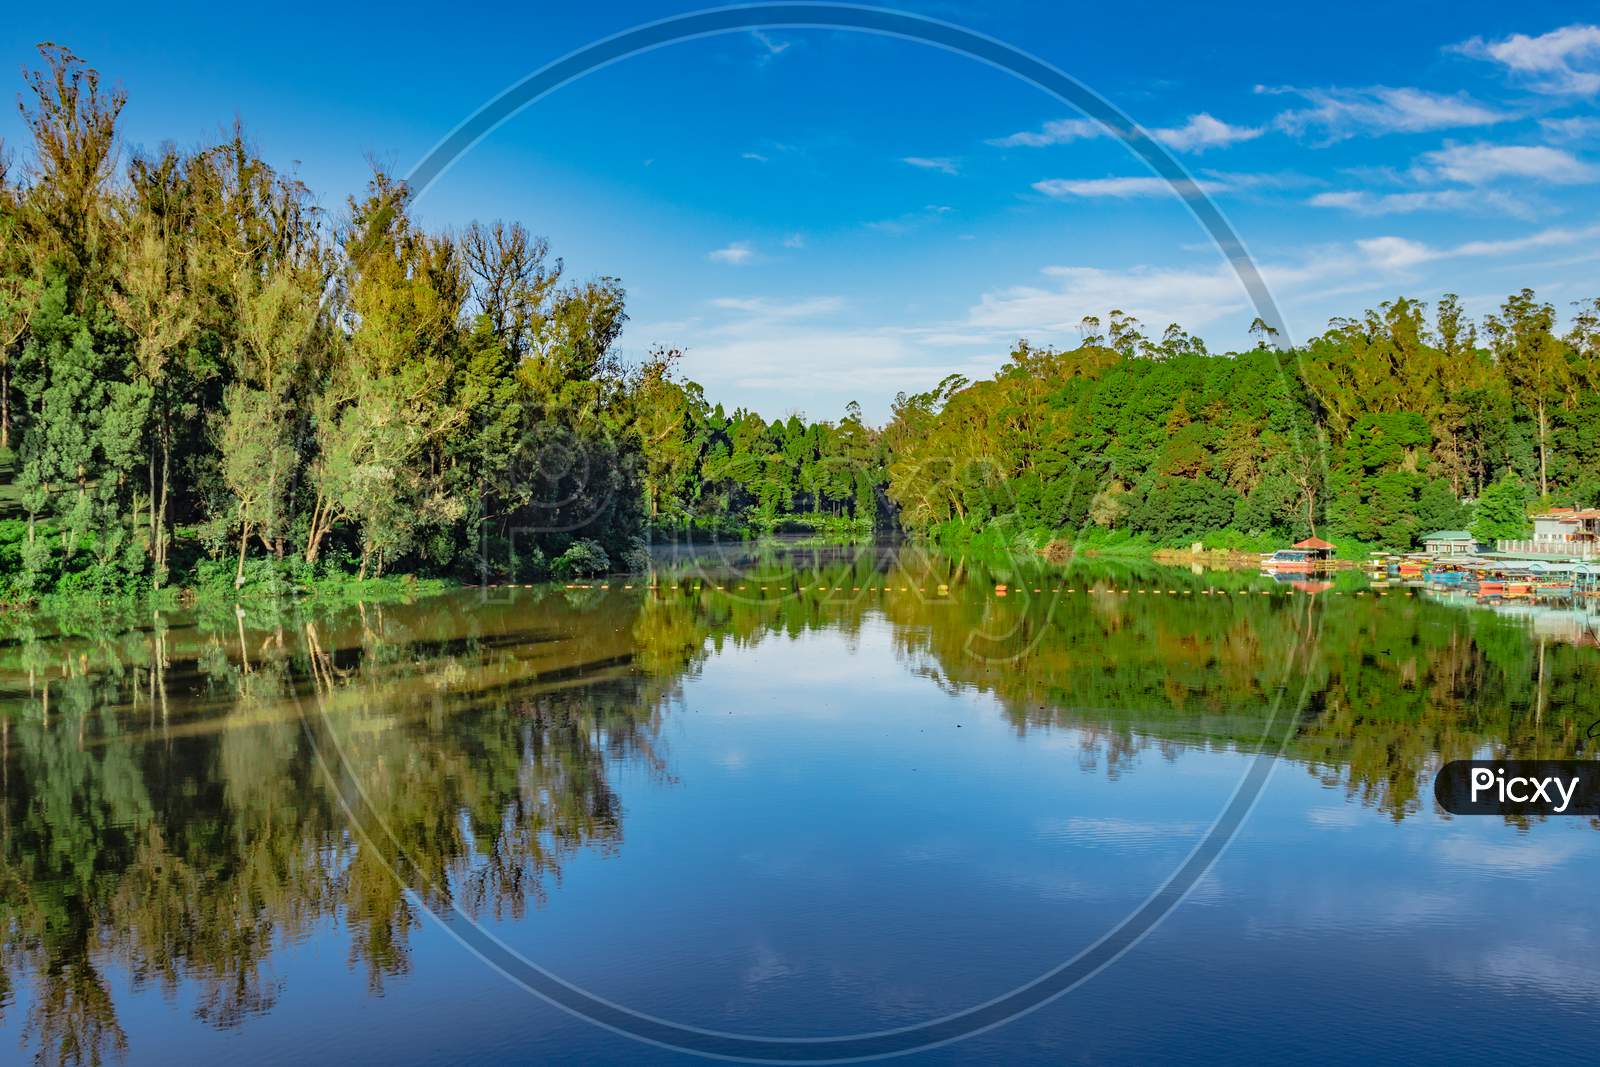 Lake Pristine With Green Forest Water Reflection And Bright Blue Sky At Morning